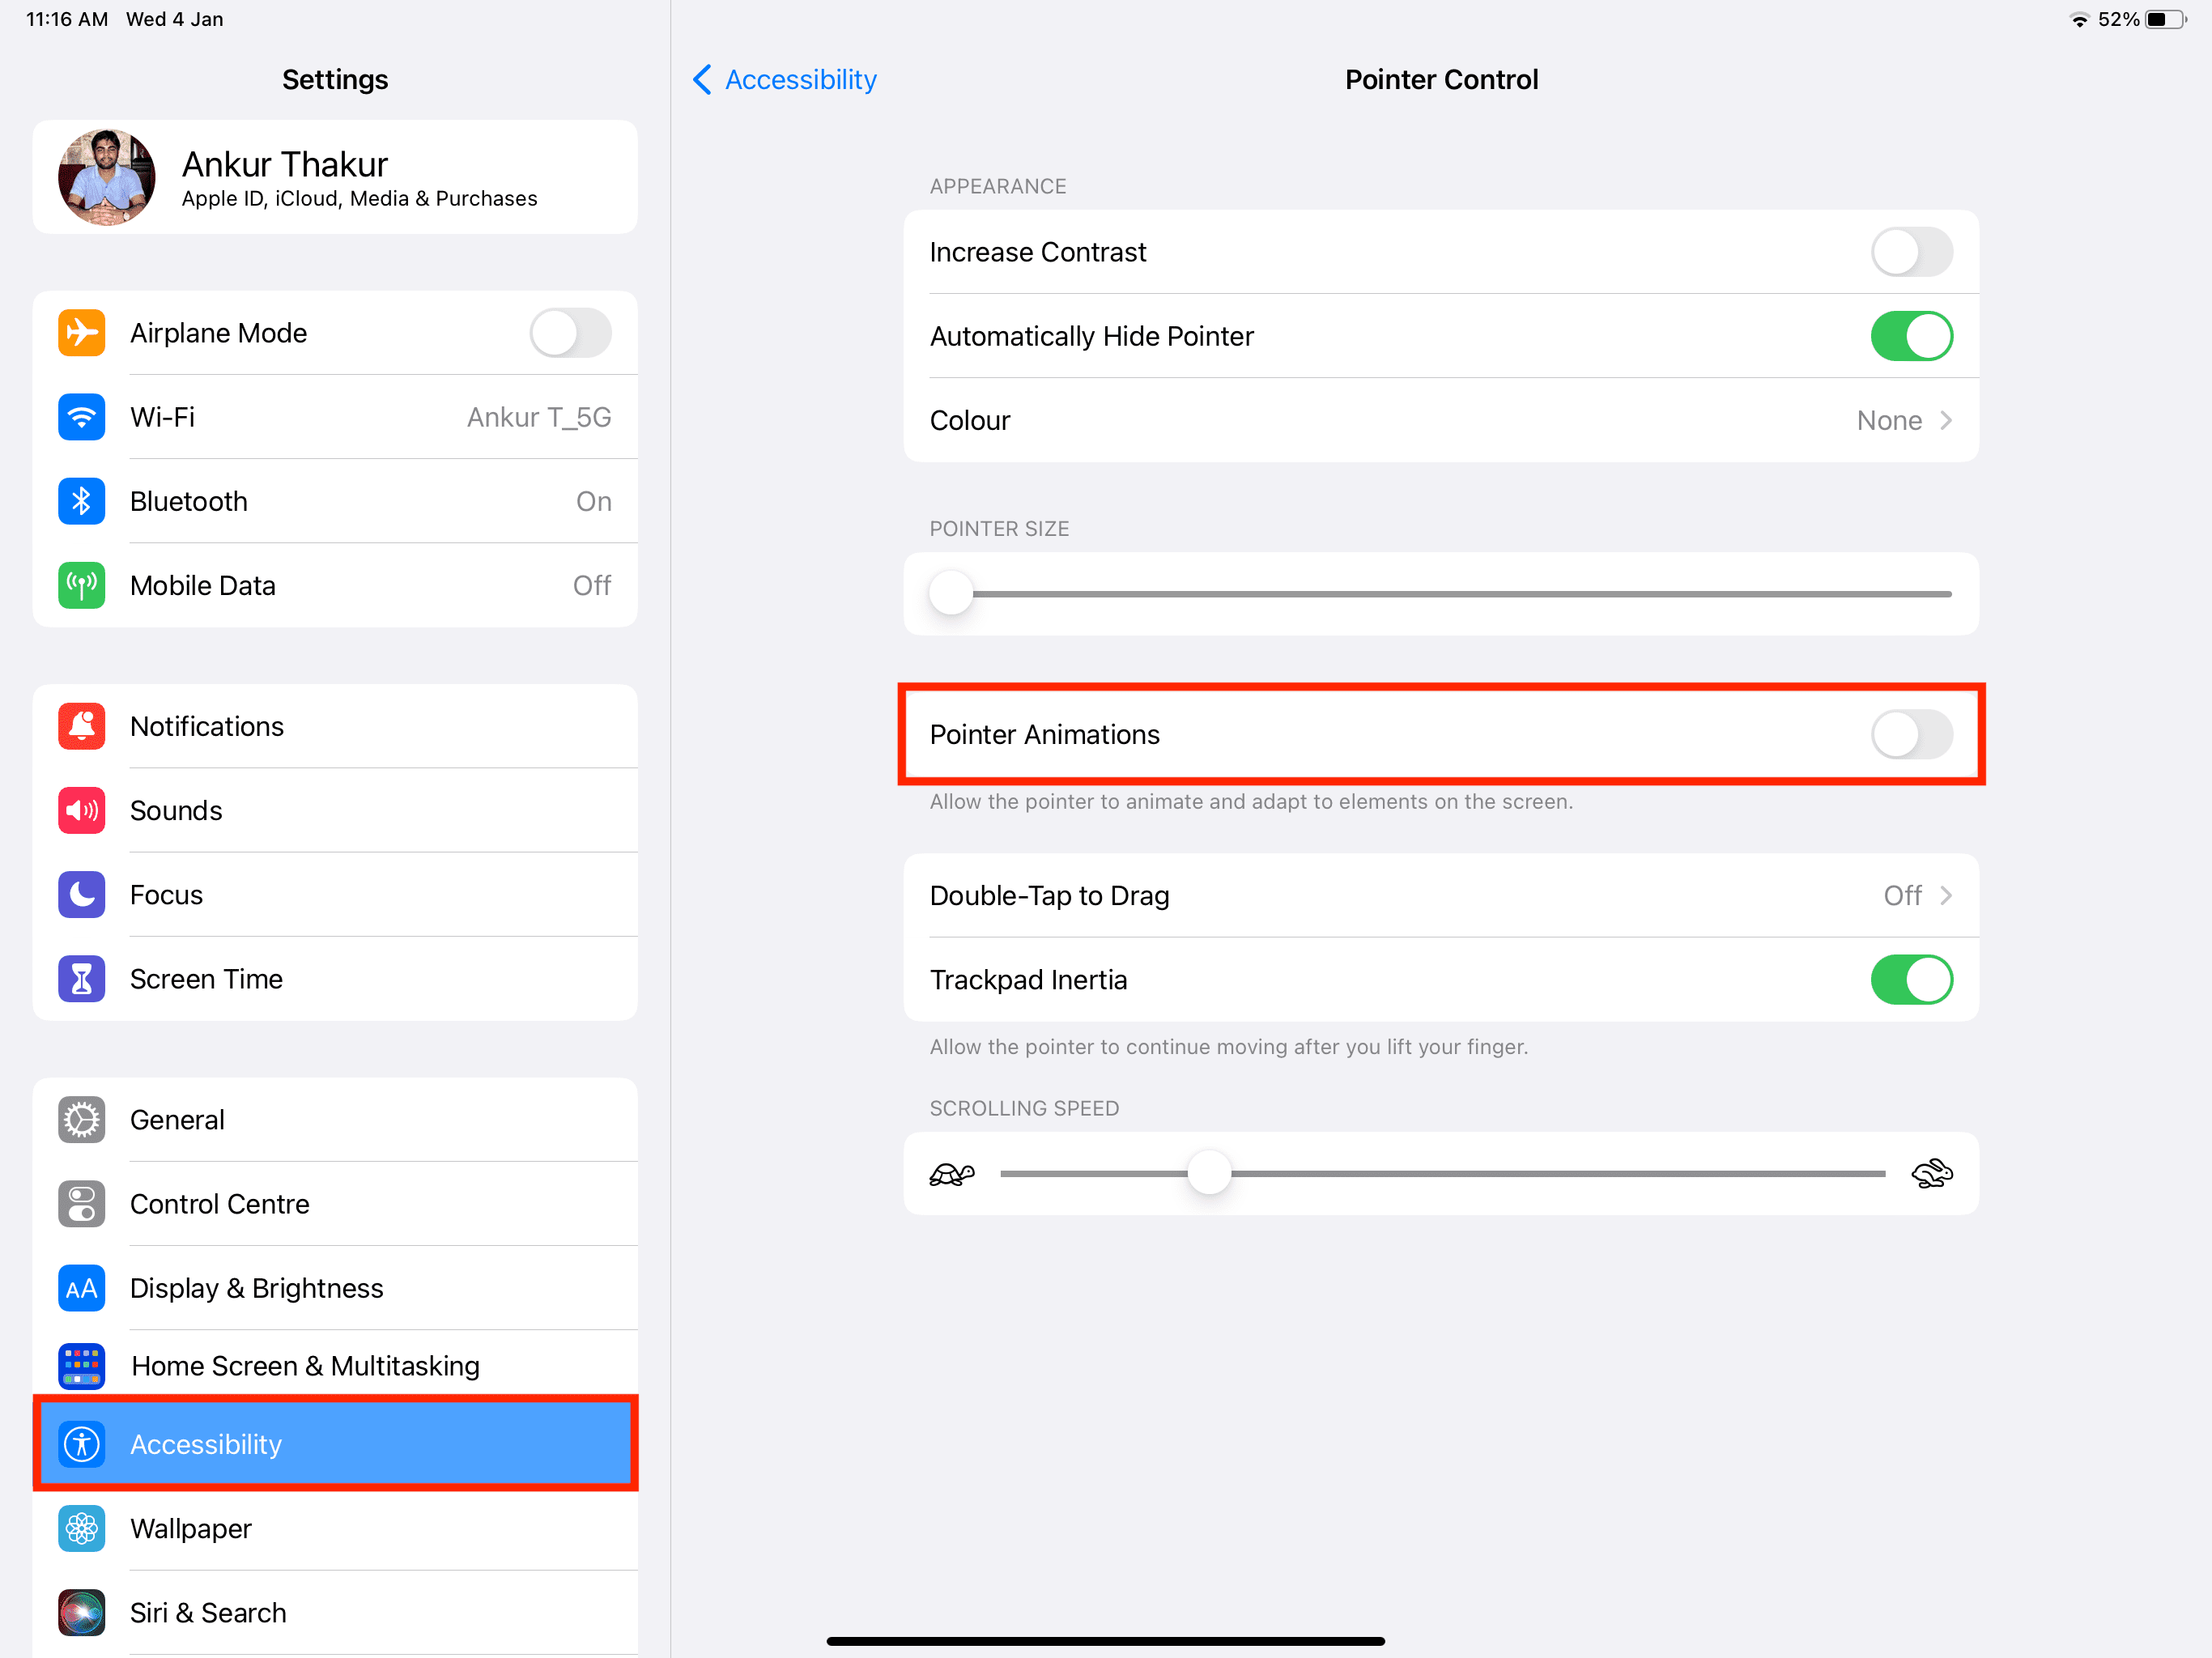 How to disable iPad pointer animations